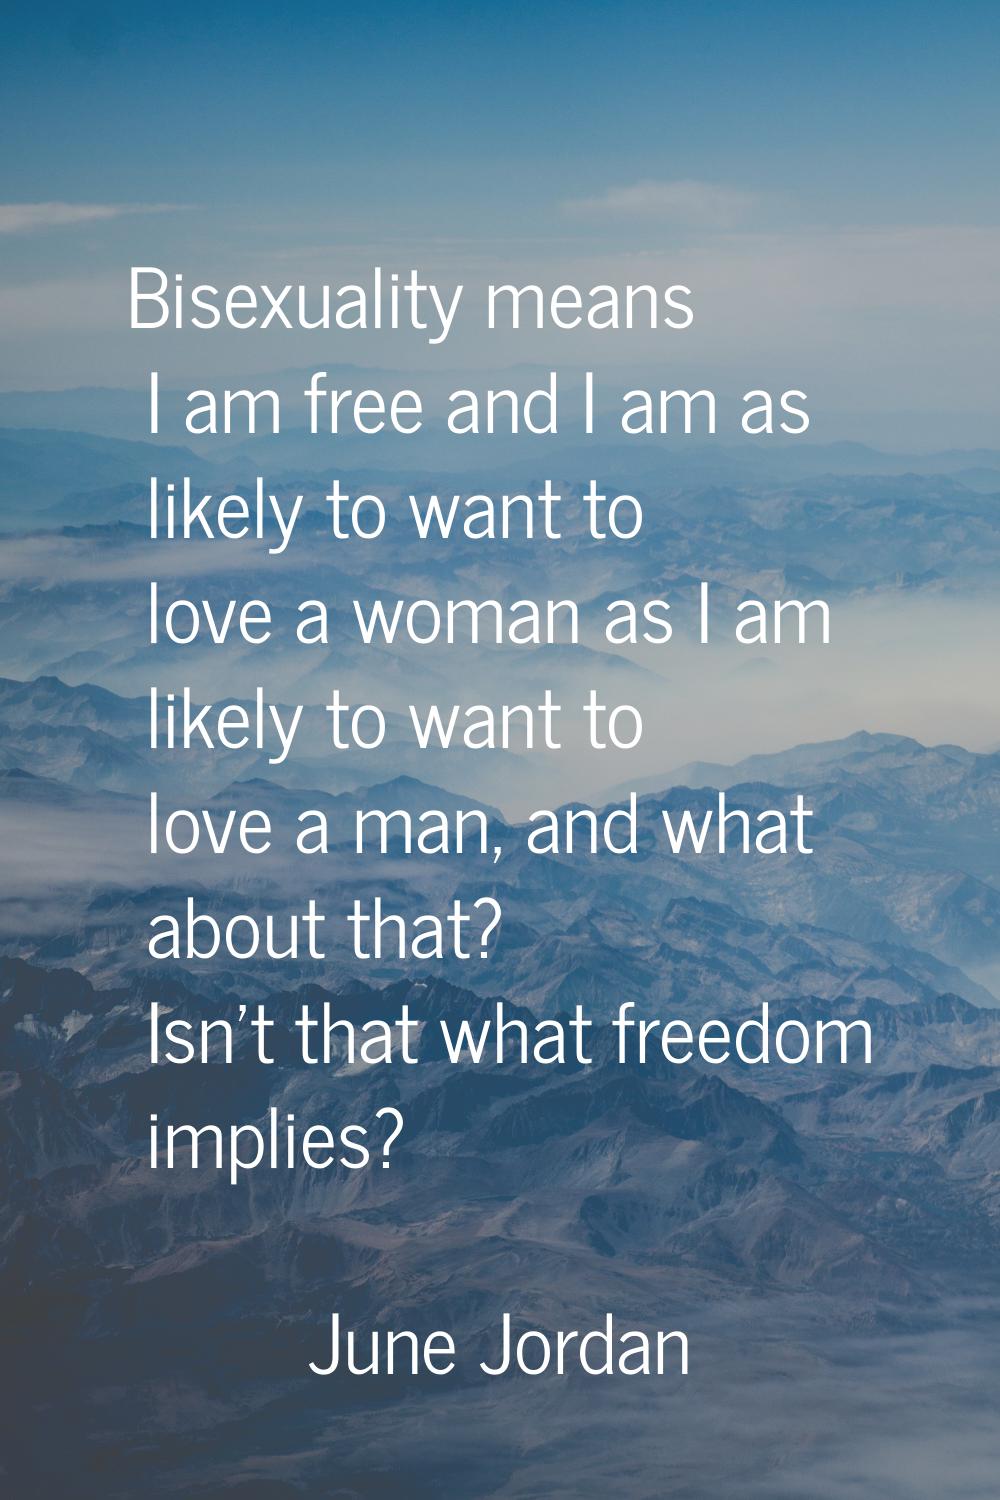 Bisexuality means I am free and I am as likely to want to love a woman as I am likely to want to lo